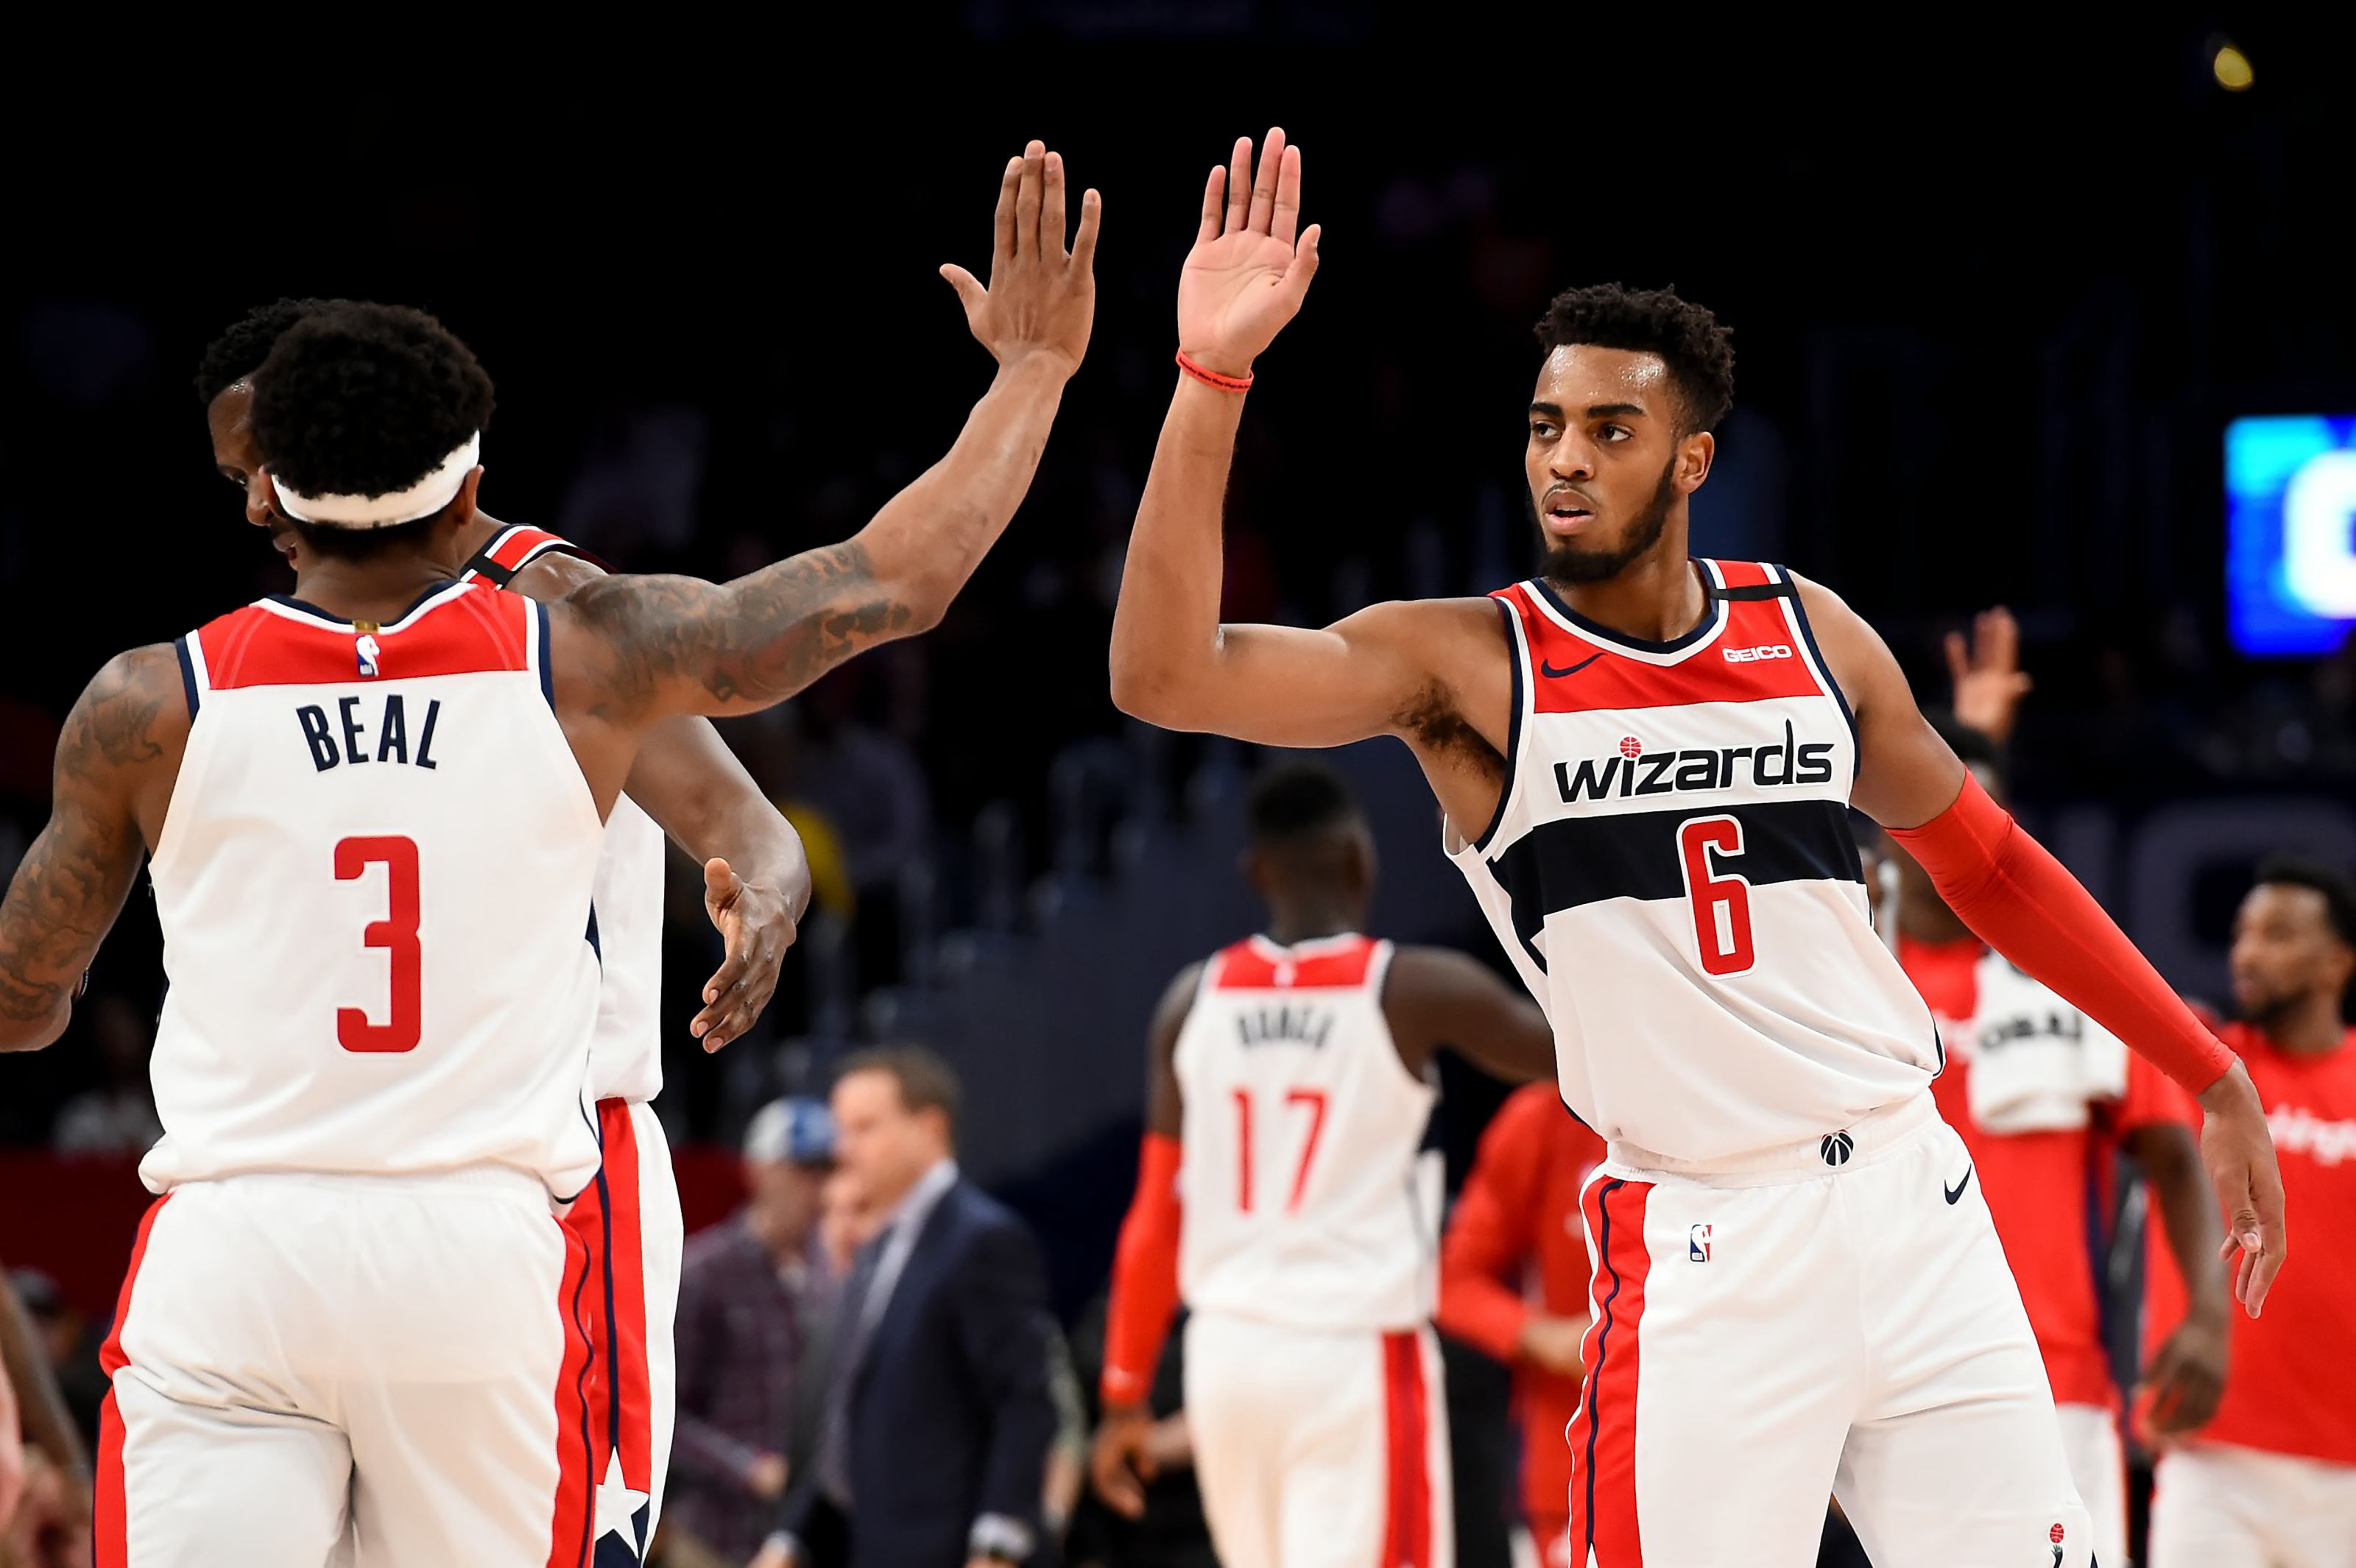 Where the Washington Wizards can improve to help their playoff chances